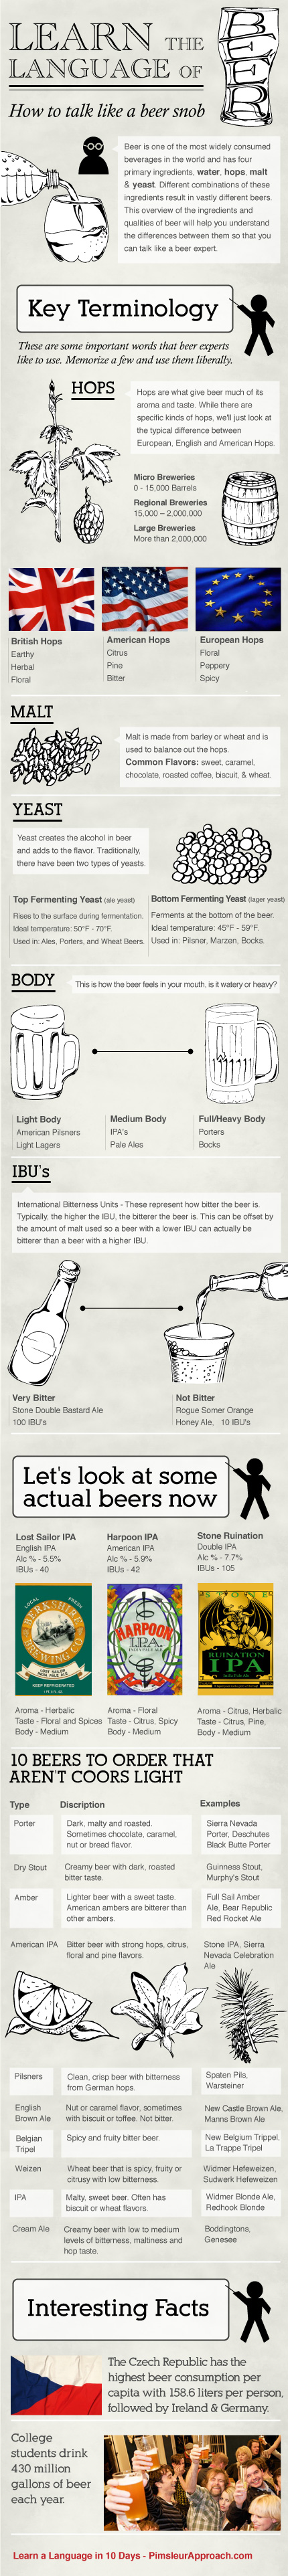 learn the language of beer